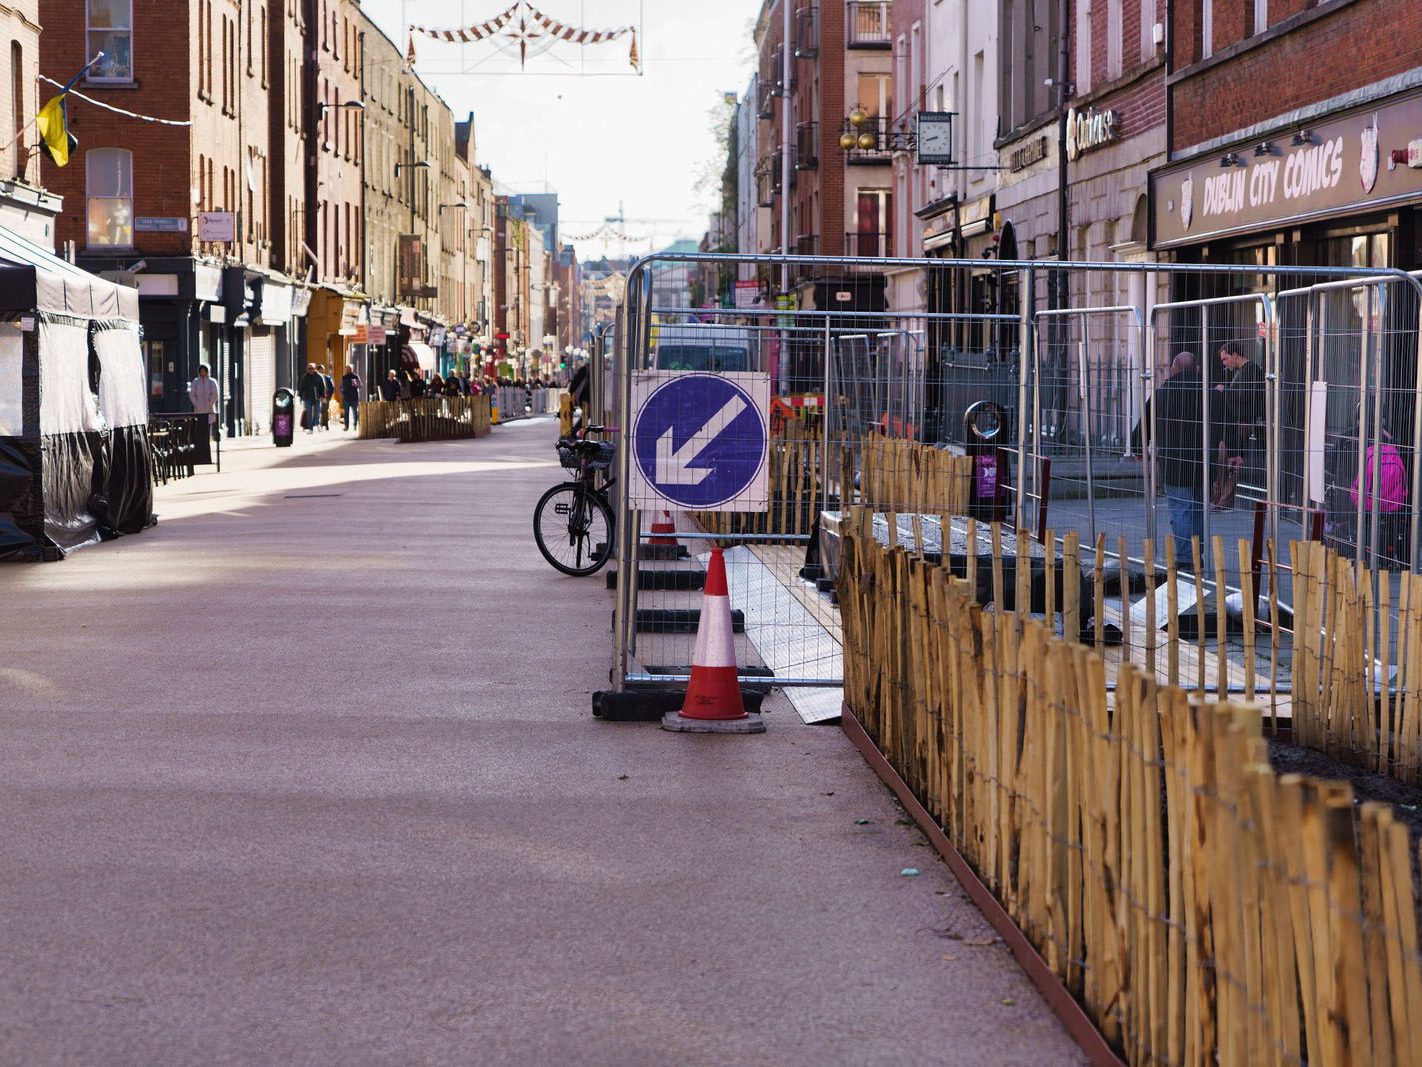 CAPEL STREET IS STILL A W.I.P. [THE PERIOD BETWEEN HALLOWEEN AND CHRISTMAS]-224778-1